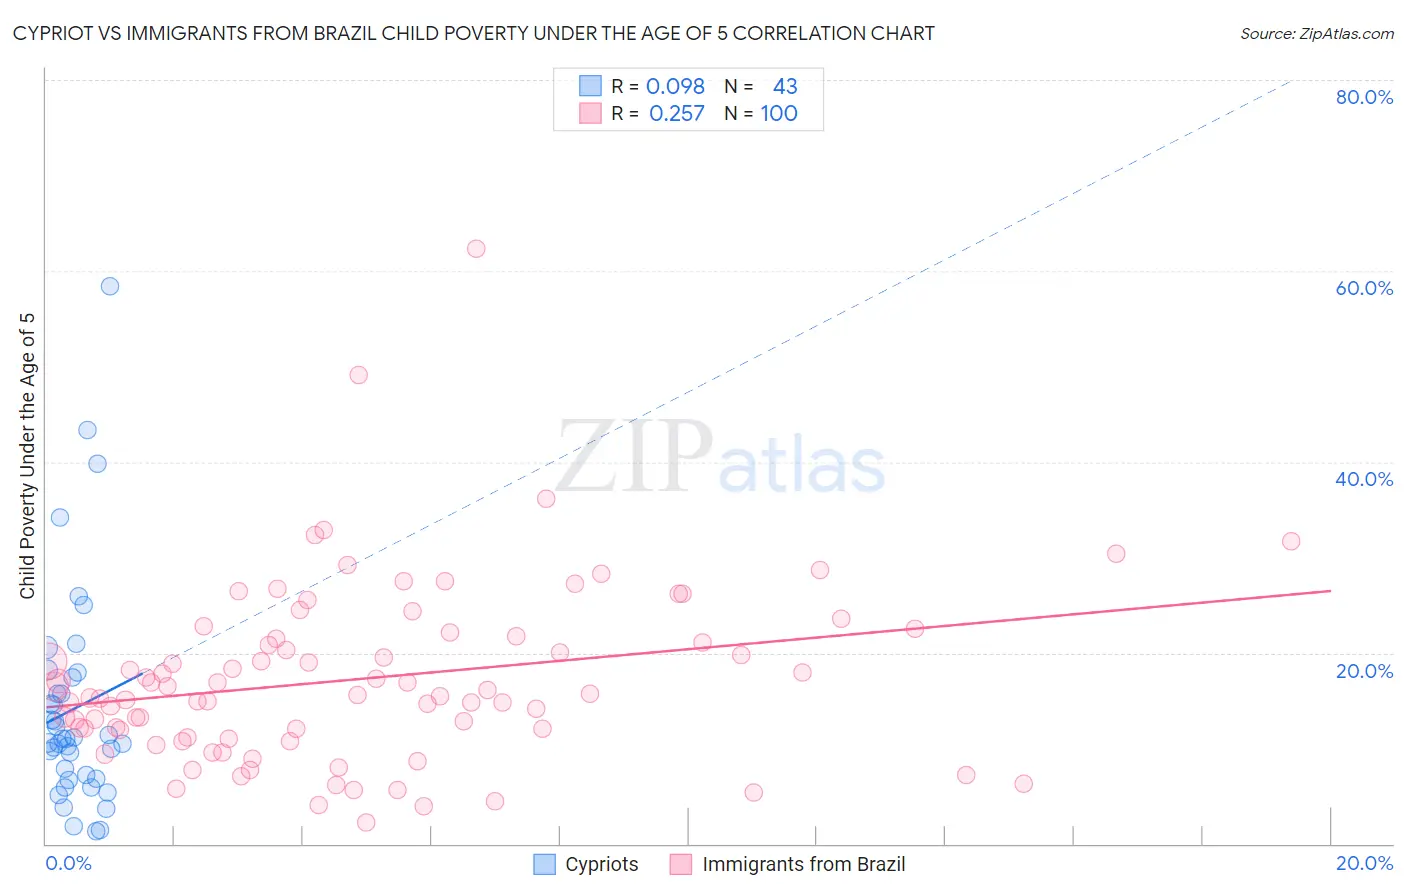 Cypriot vs Immigrants from Brazil Child Poverty Under the Age of 5